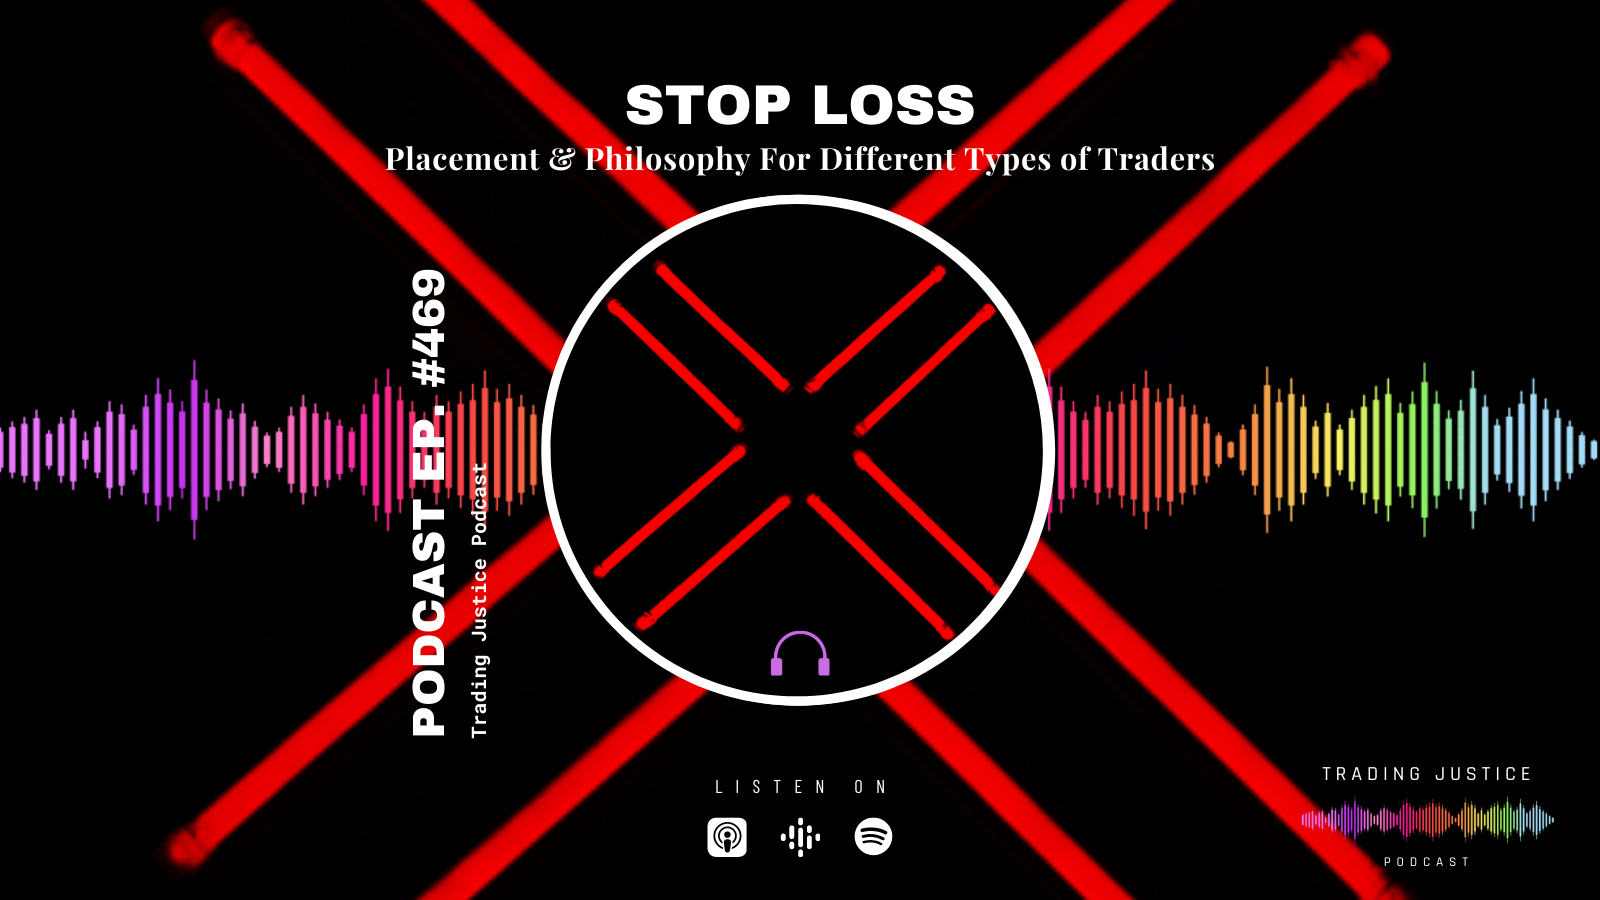 Trading Justice 469 – Stop Loss: Placement & Philosophy For Different Types of Traders